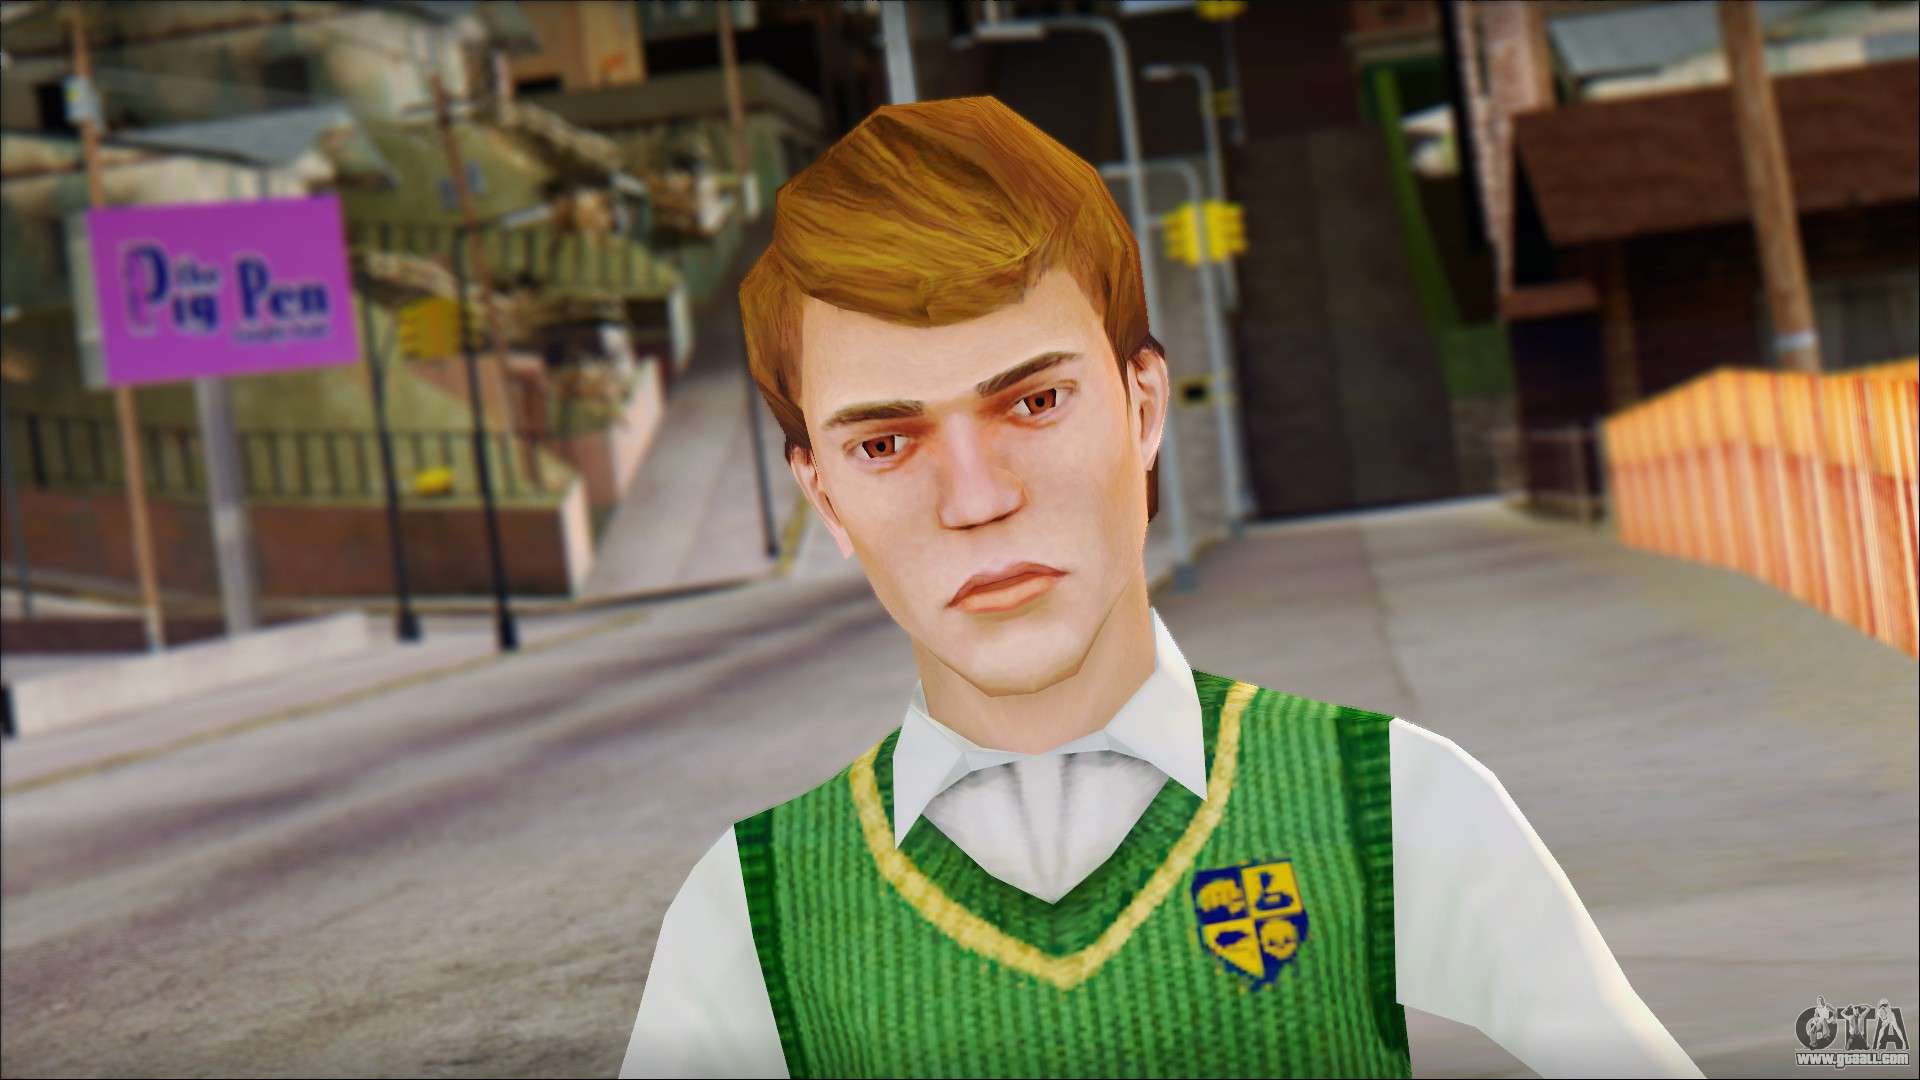 Download Game Bully: Scholarship Edition